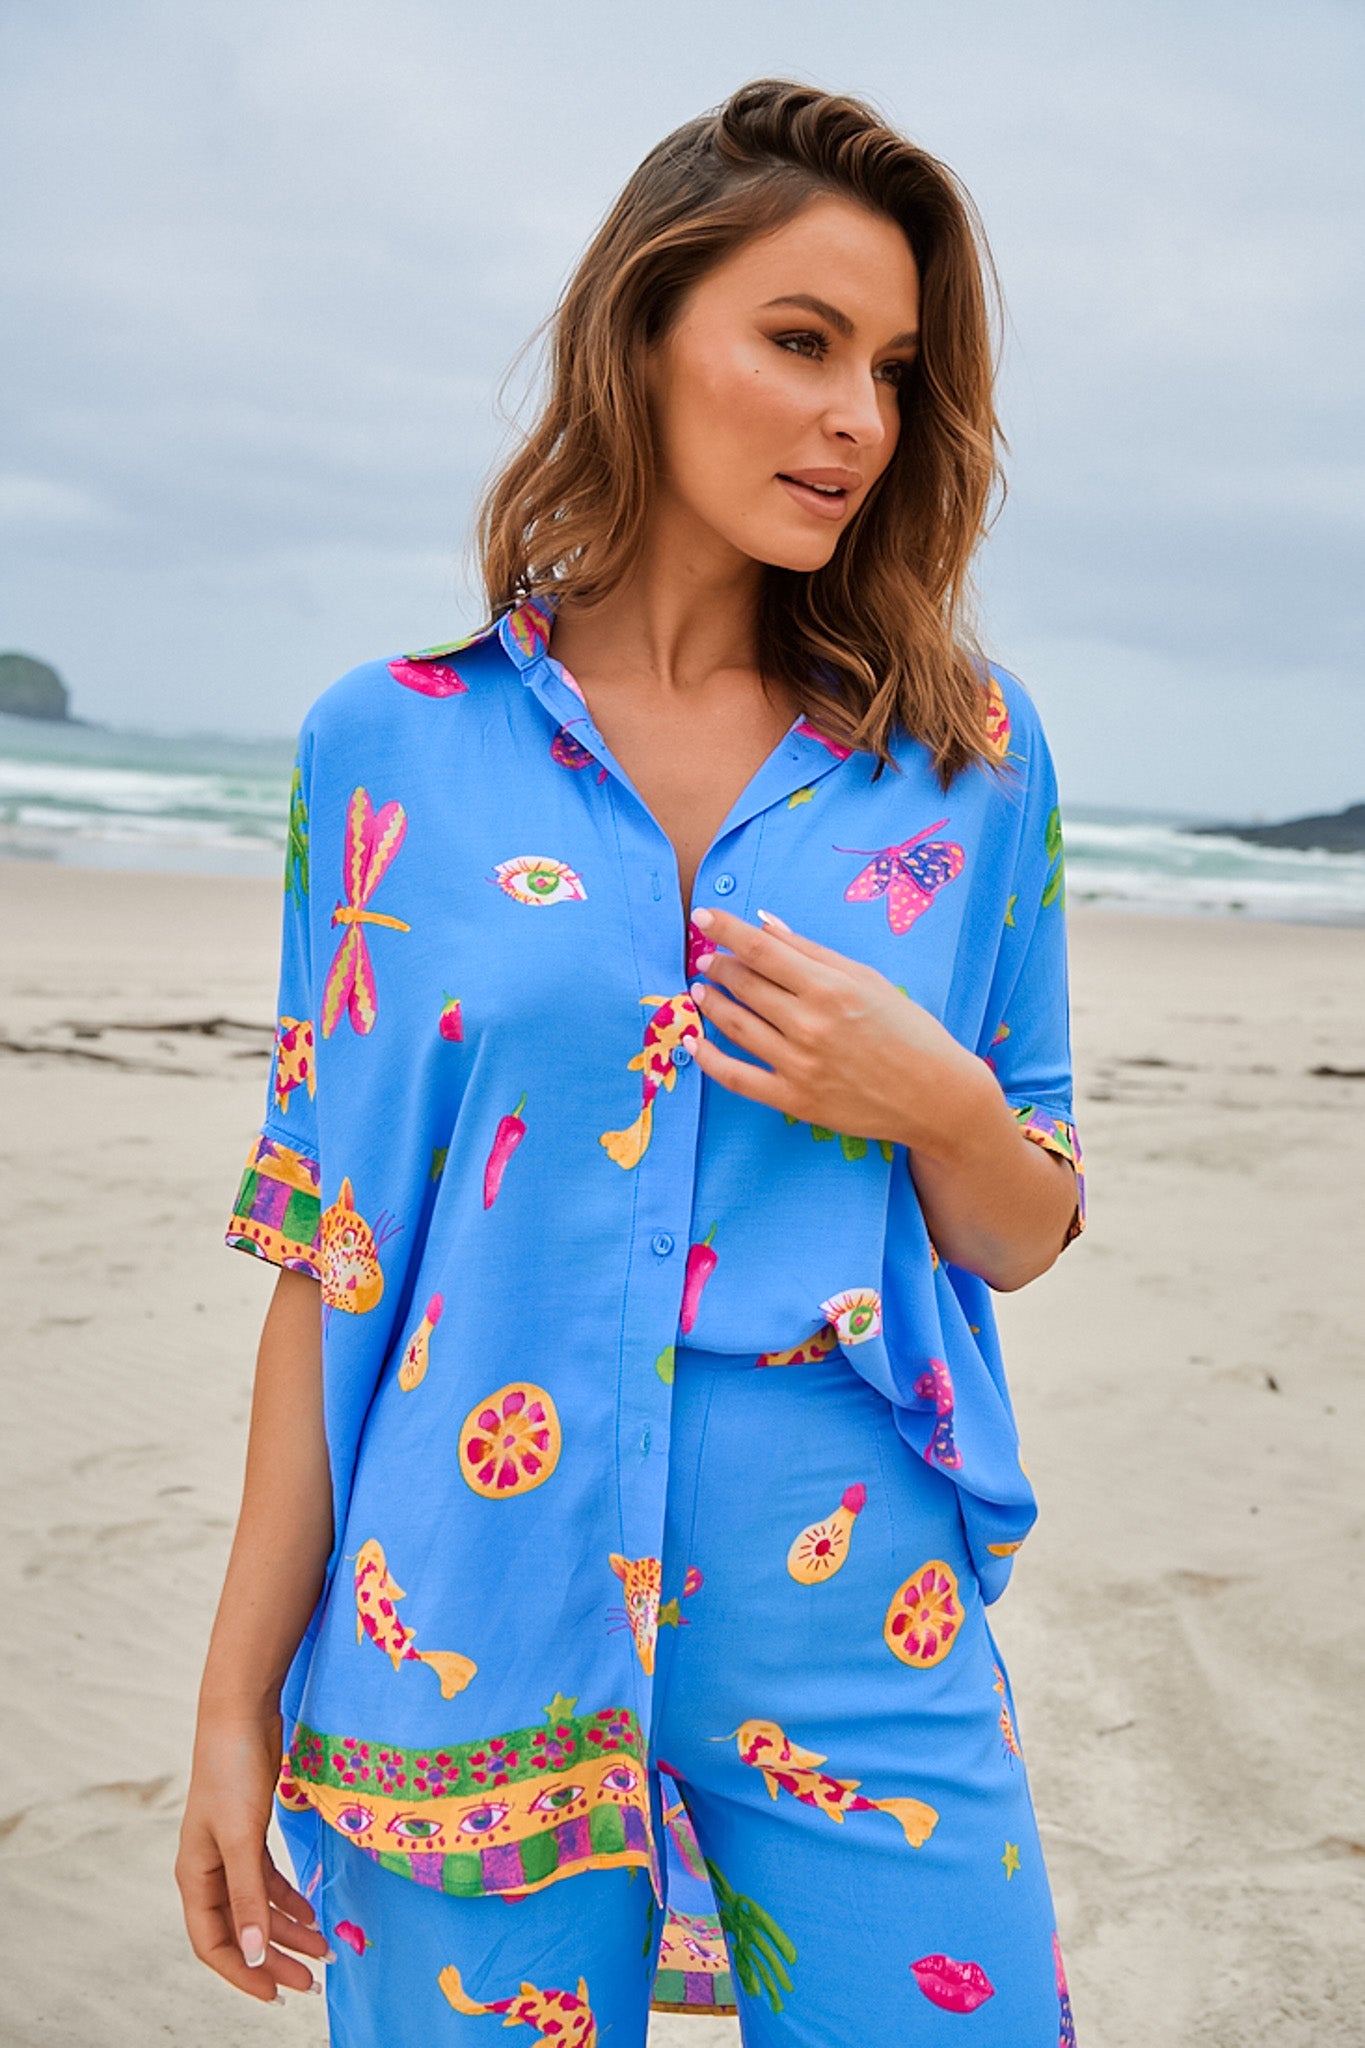 JAASE - River Shirt: Oversized Button Down Shirt with Scoop High-Low Hem in Mati Print